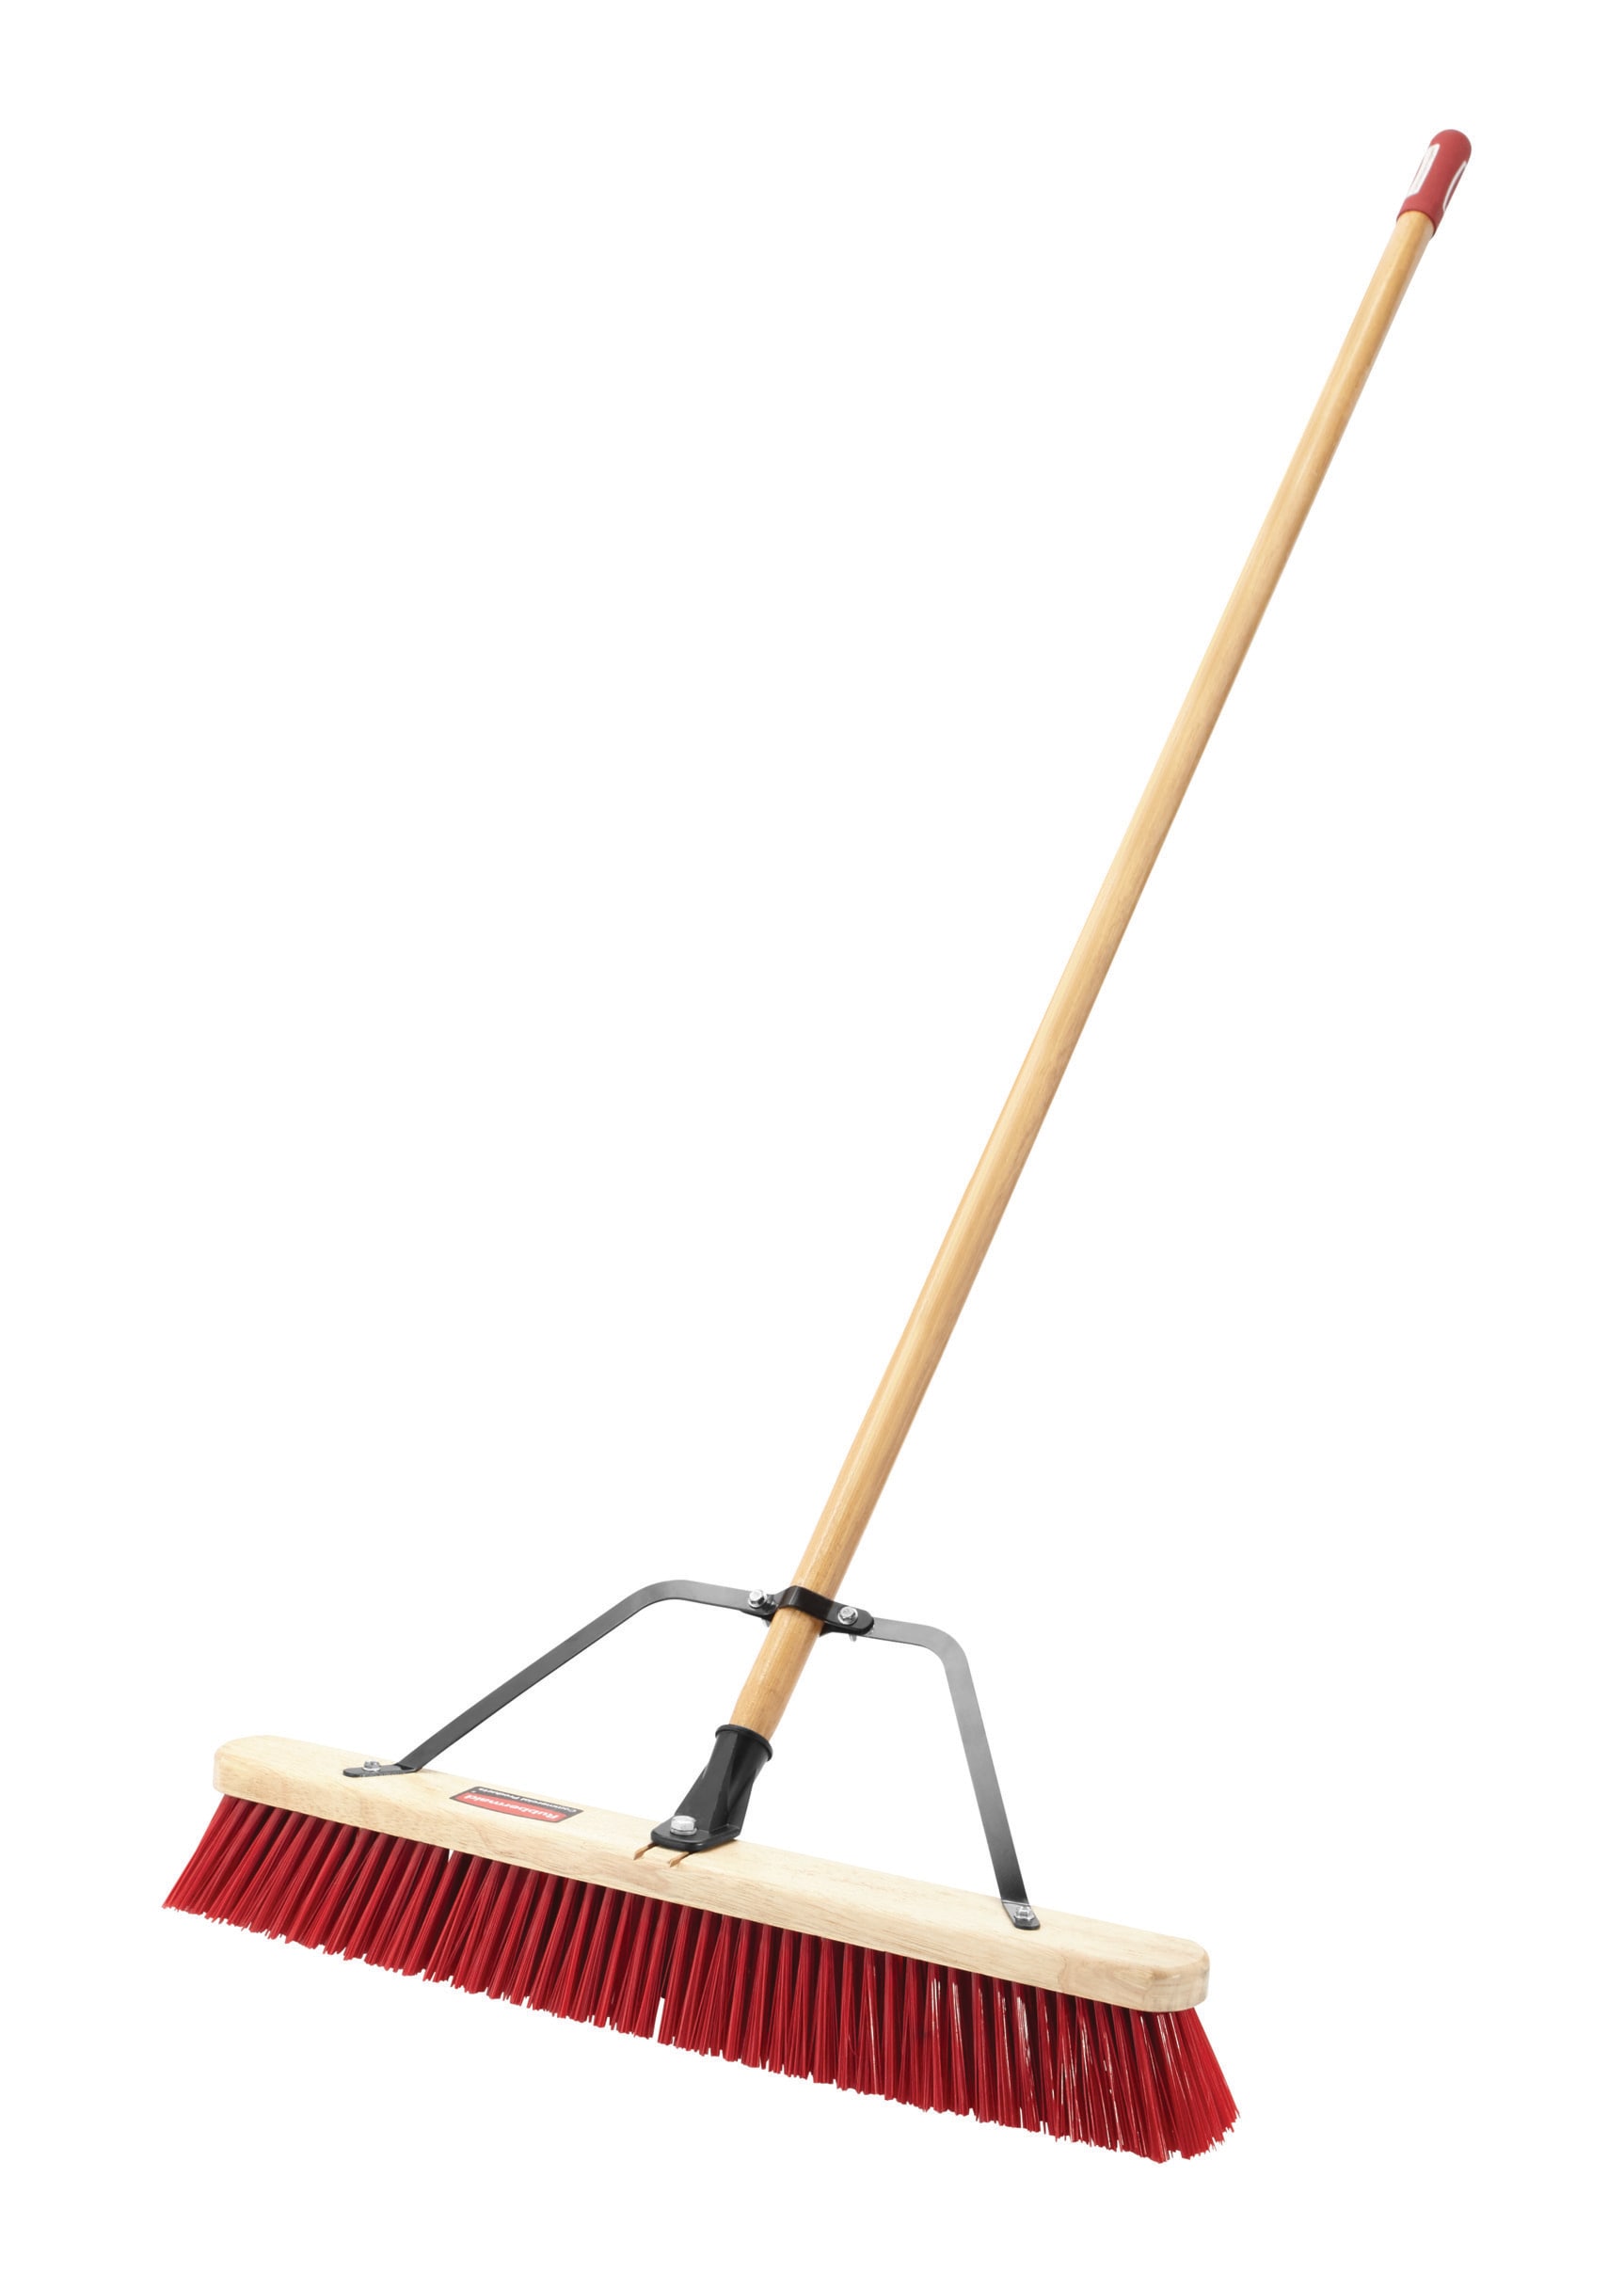 Rubbermaid Commercial 36 Maximizer Push-to-Center Broom HEAD ONLY